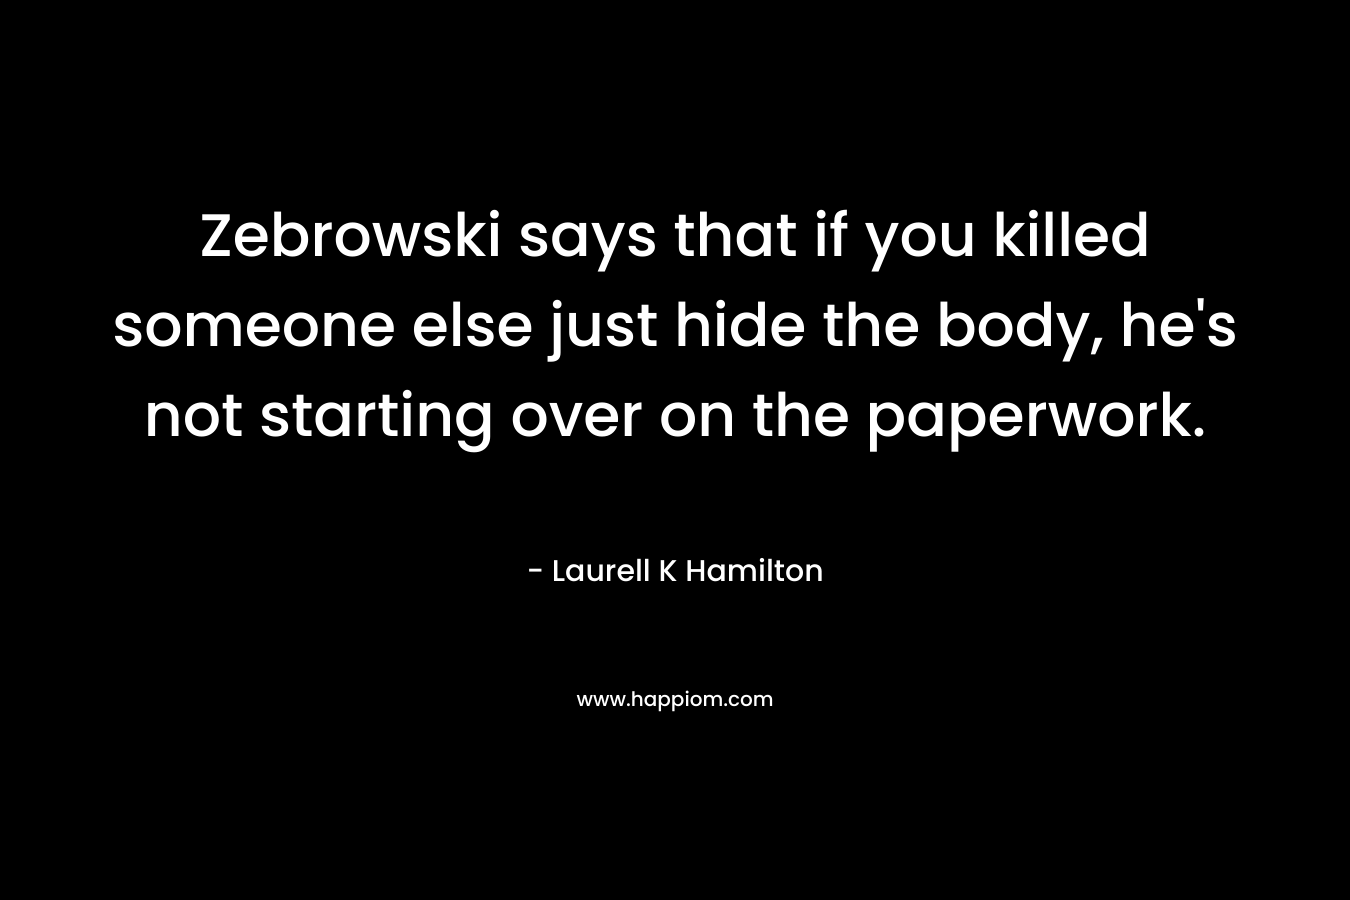 Zebrowski says that if you killed someone else just hide the body, he’s not starting over on the paperwork. – Laurell K Hamilton